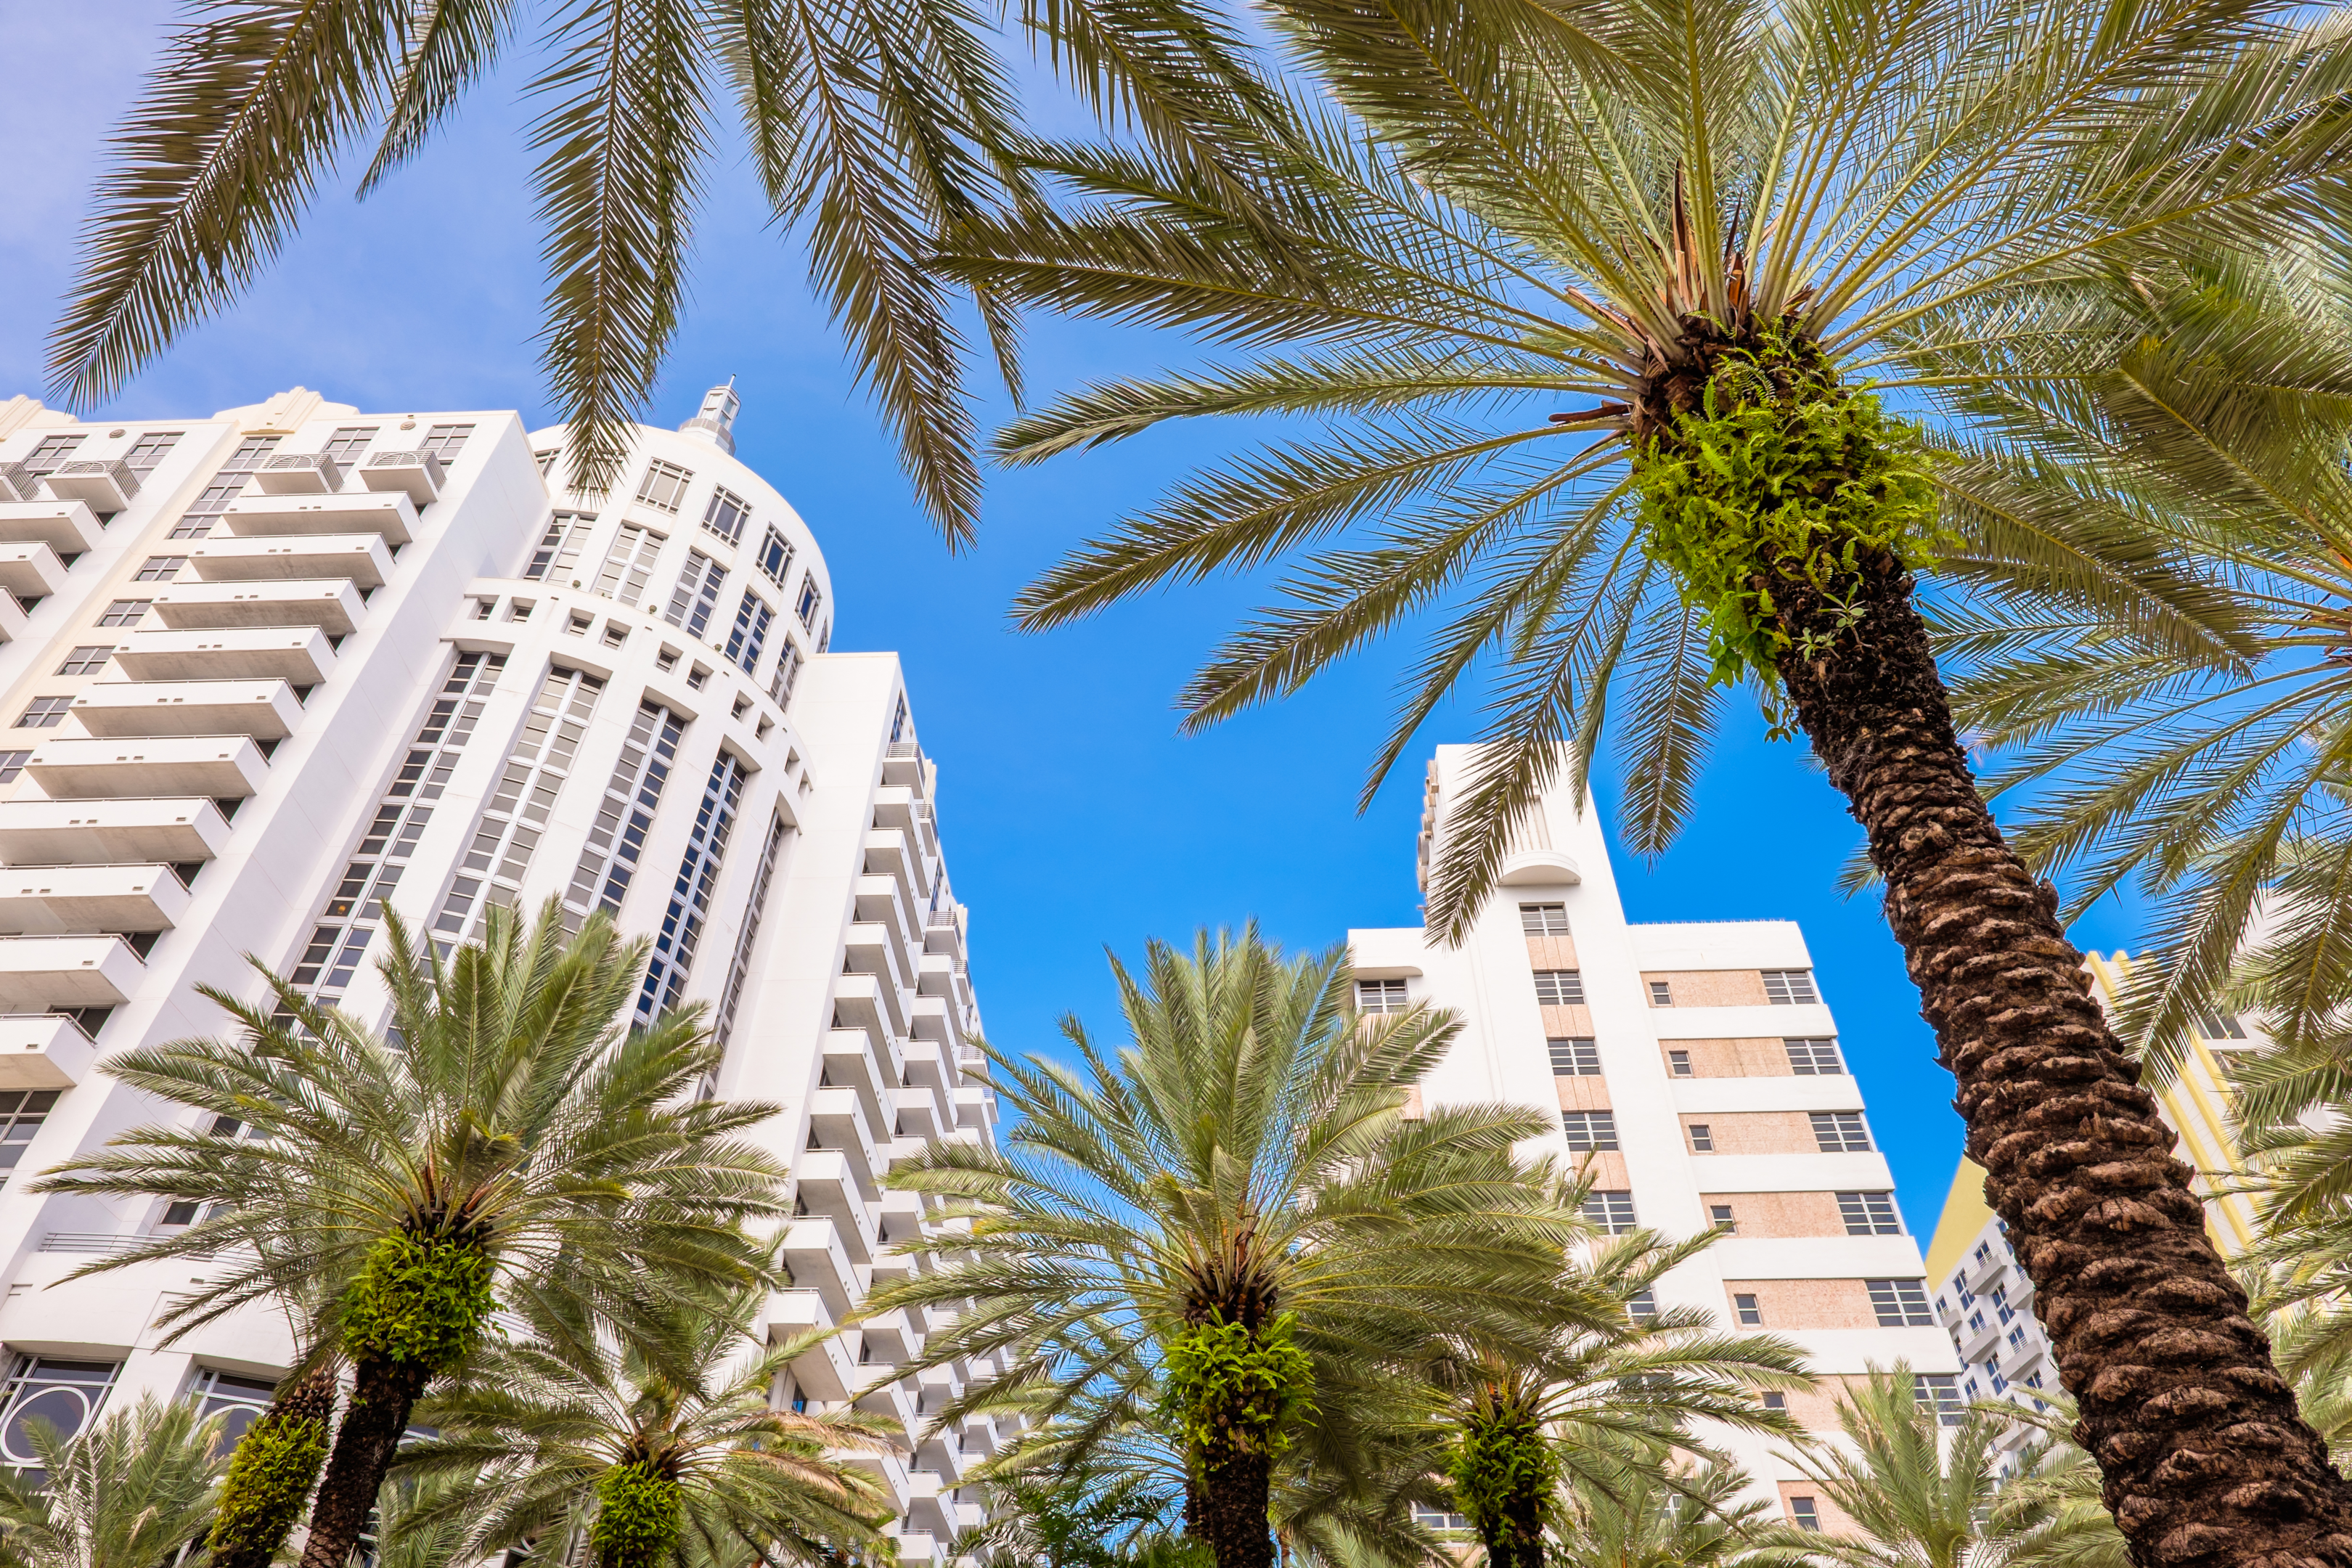 Loews Miami Beach Hotel with palm trees and blue skies in South Beach Florida